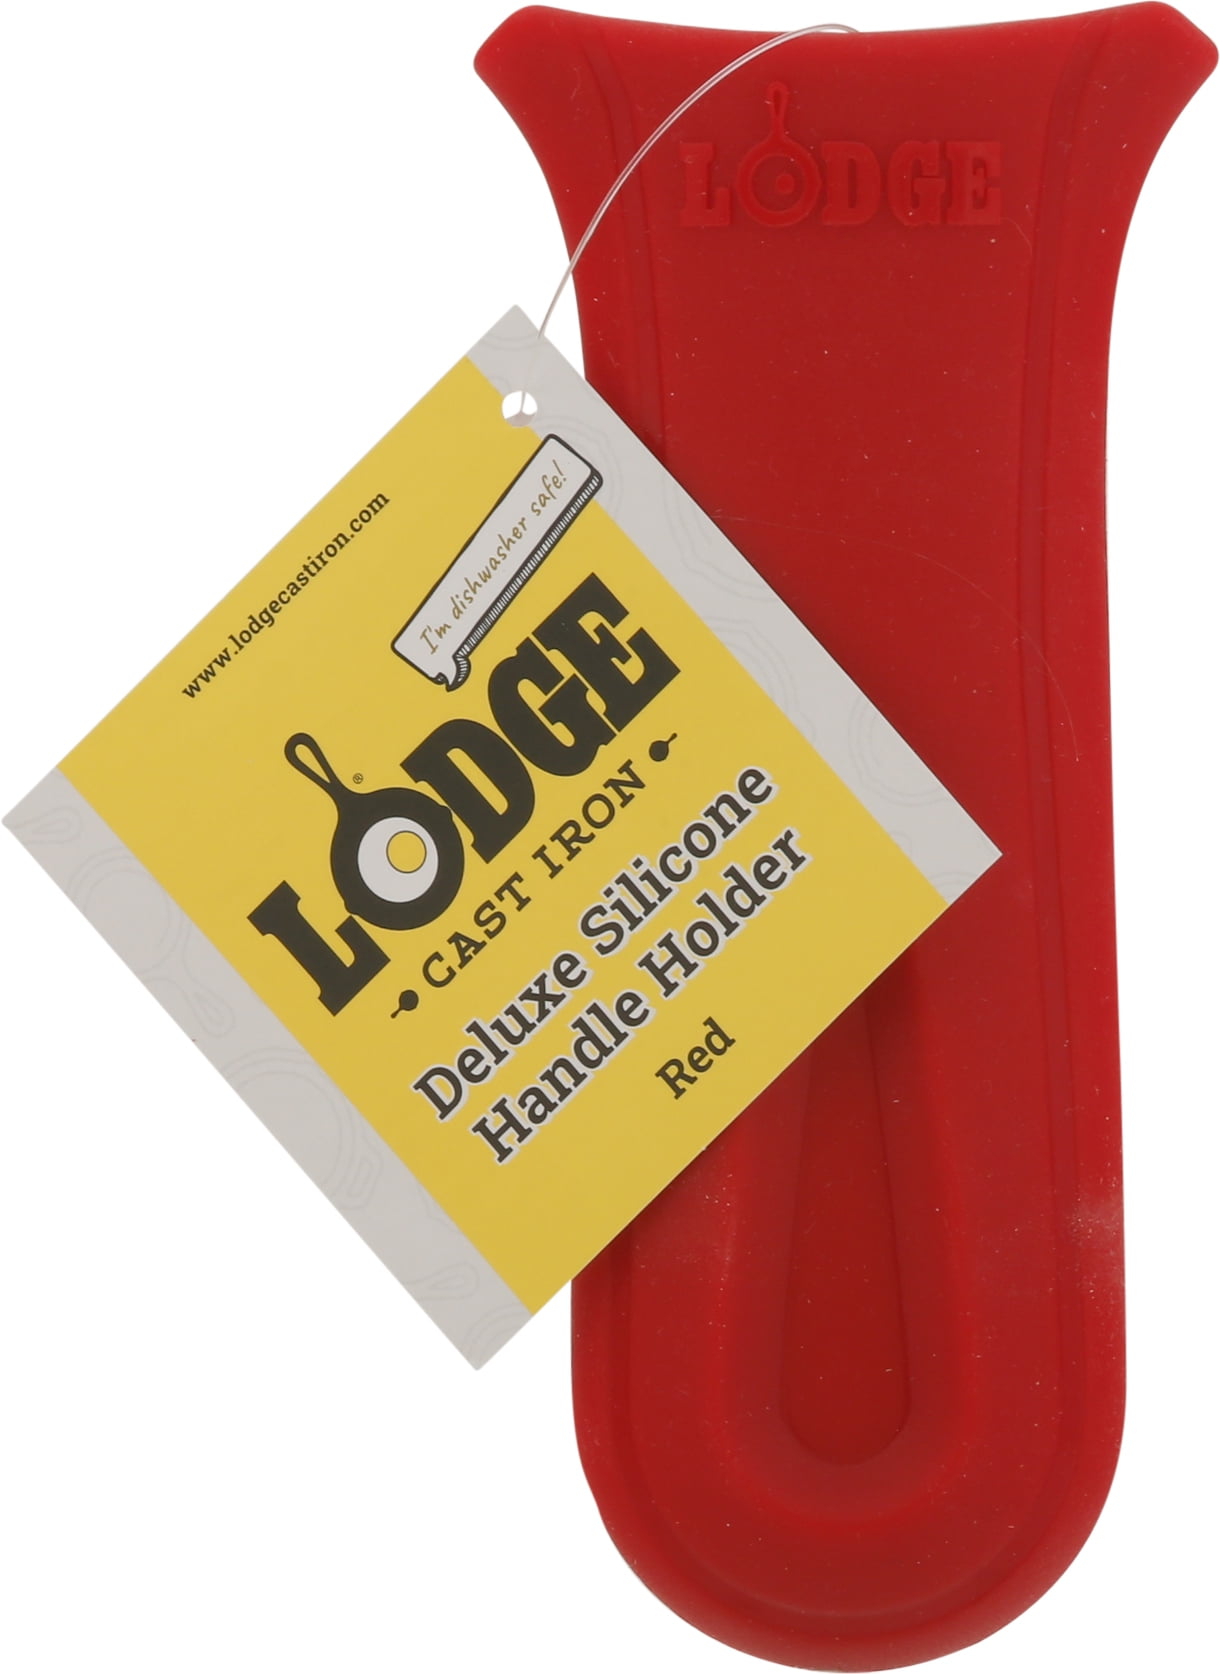 Lodge Deluxe Silicone Red Handle Holder 1 ea 